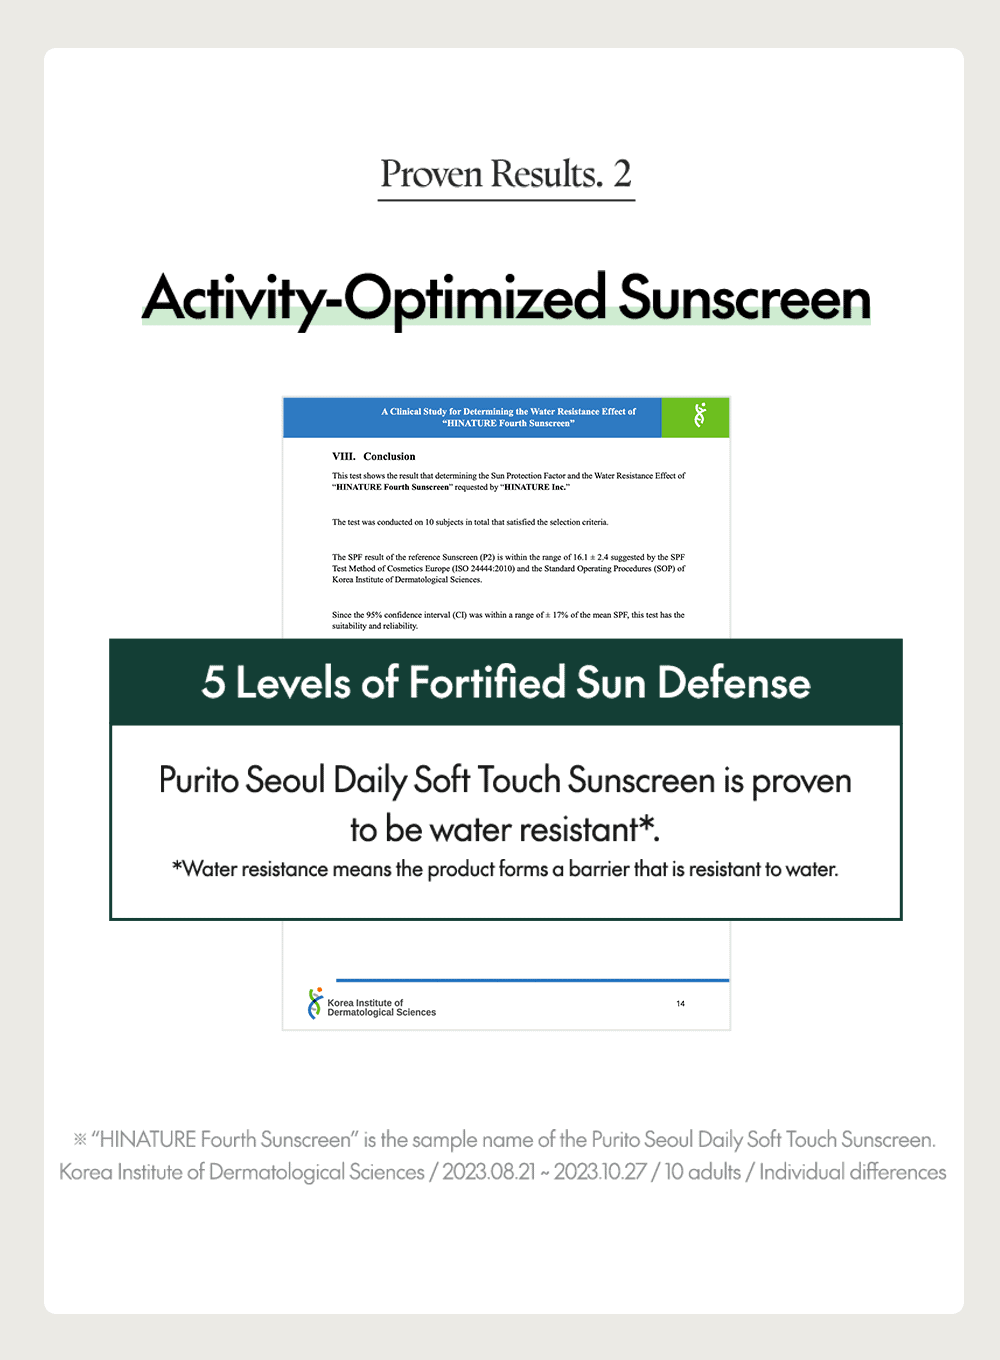 Daily Soft Touch Sunscreen (Renewer)